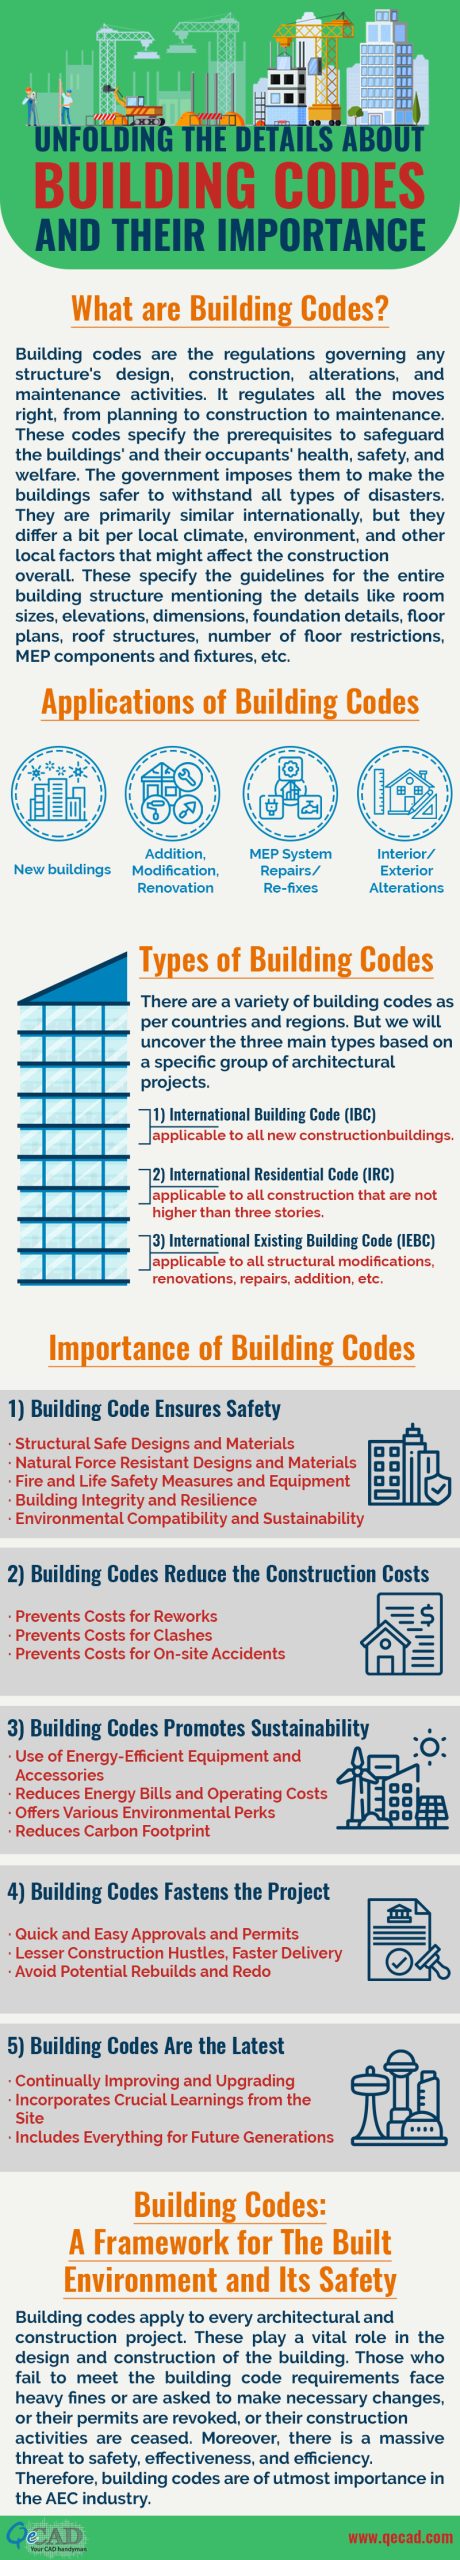 The Importance of Building Codes in Construction